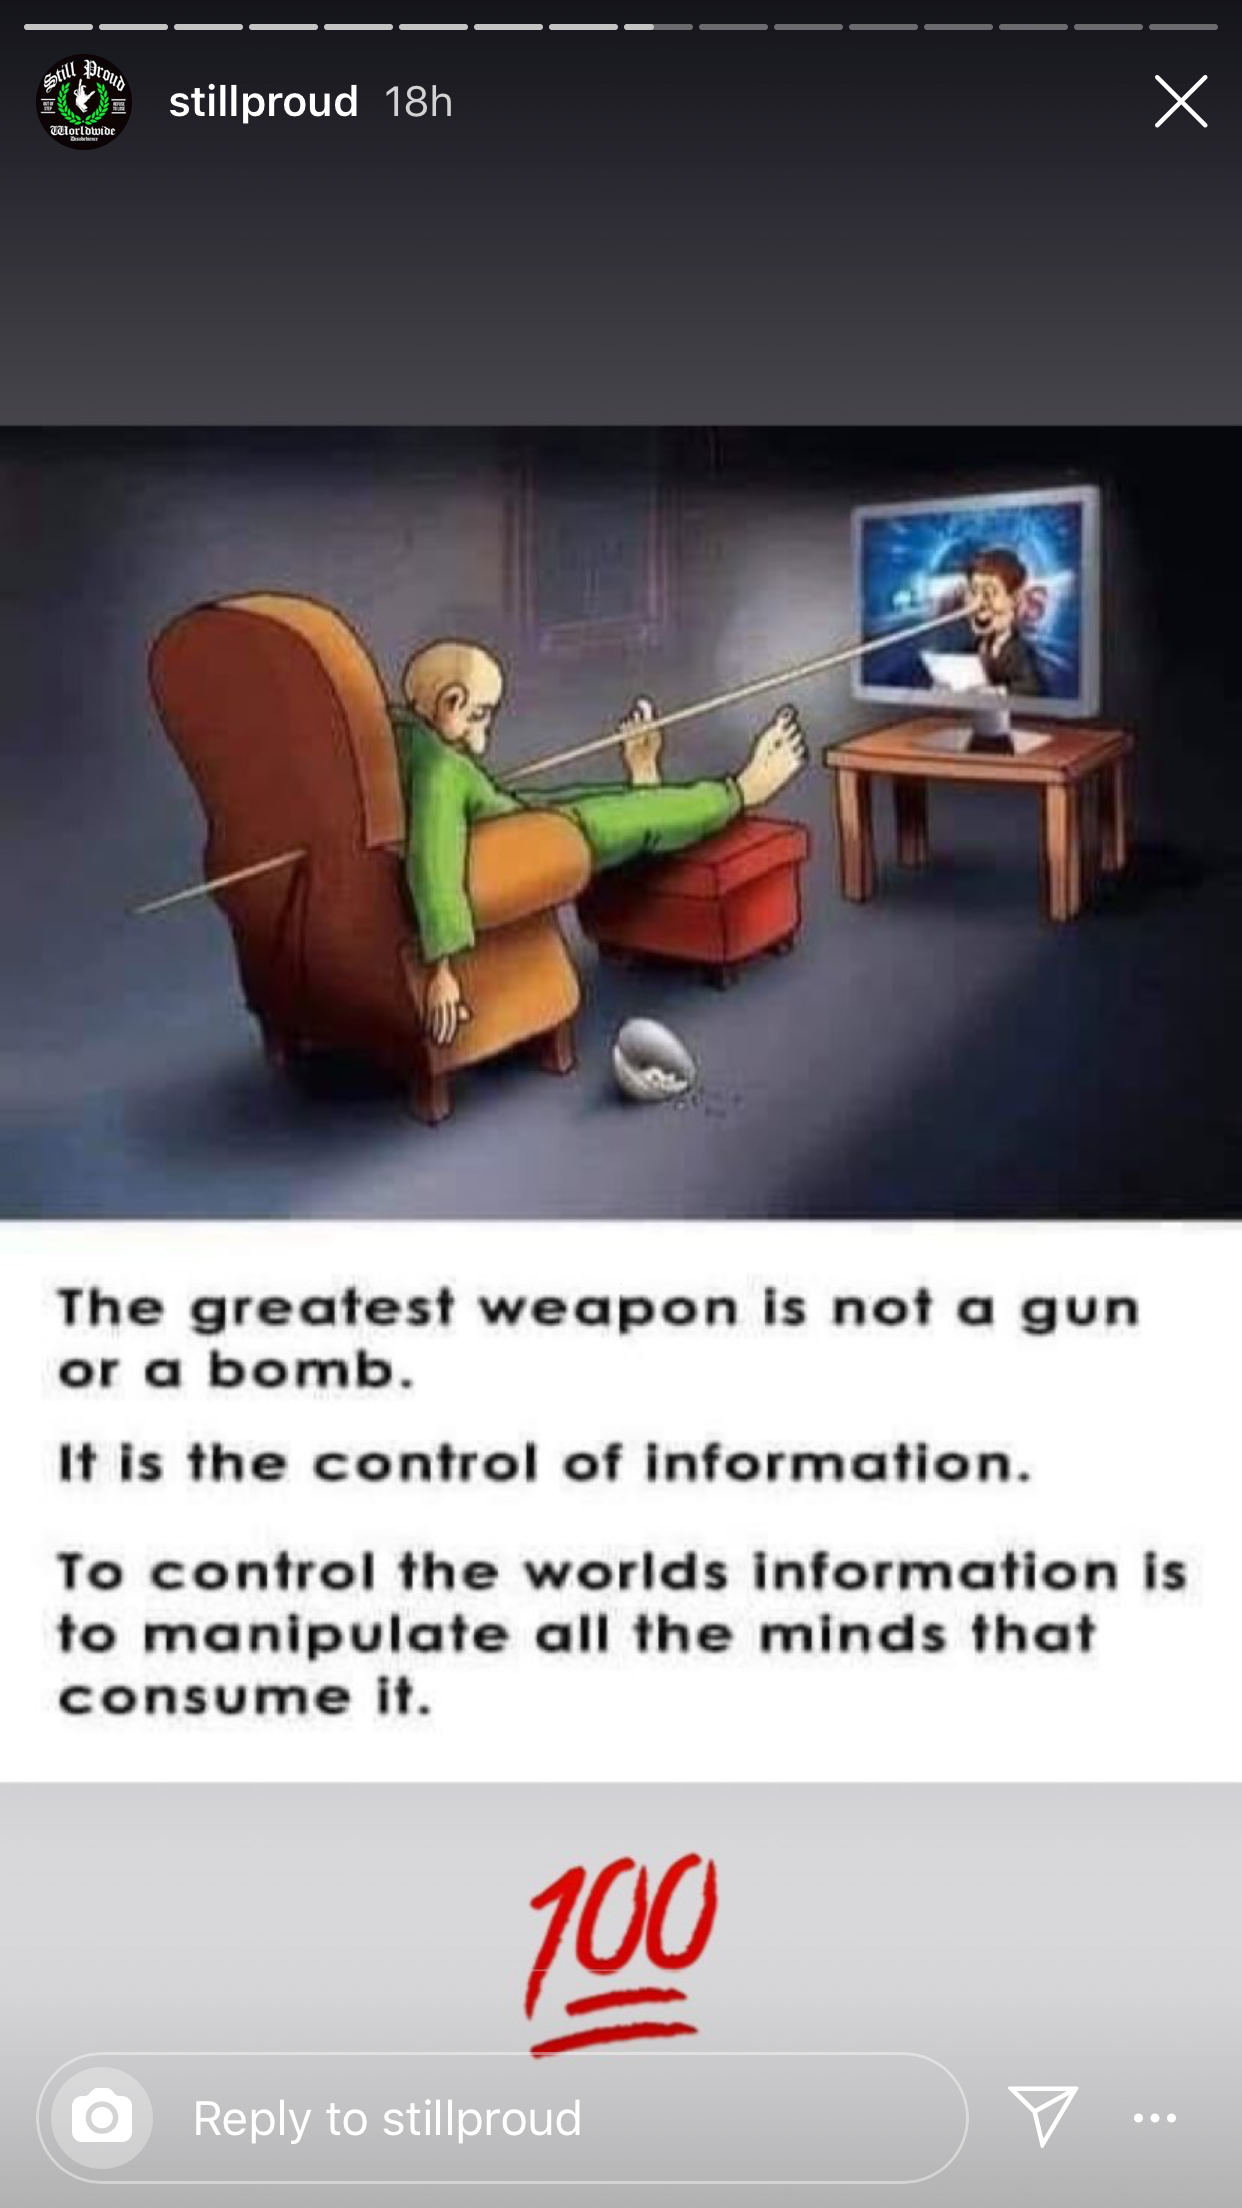 still proud 18h The greatest weapon is not a gun or a bomb. It is the control of information. To control the worlds information is to manipulate all the minds that consume it. 100 to stillproud